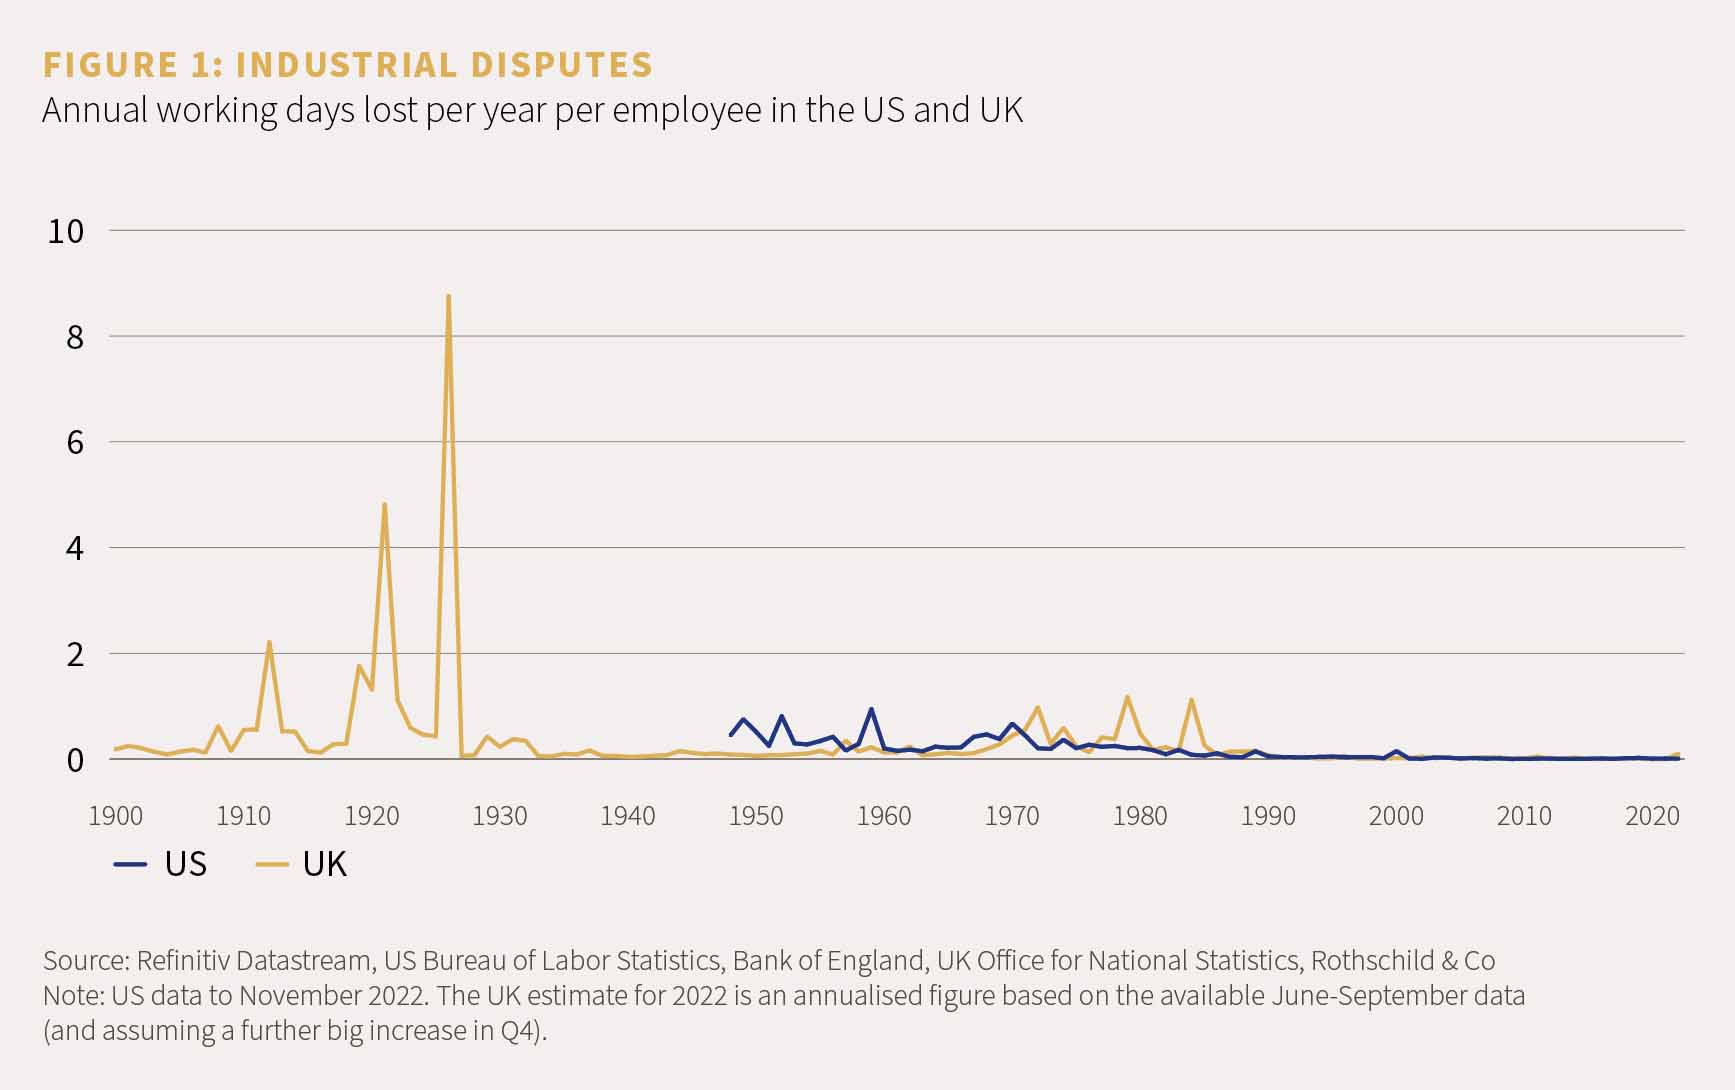 Chart showing annual working days lost per year per employee in the US and UK